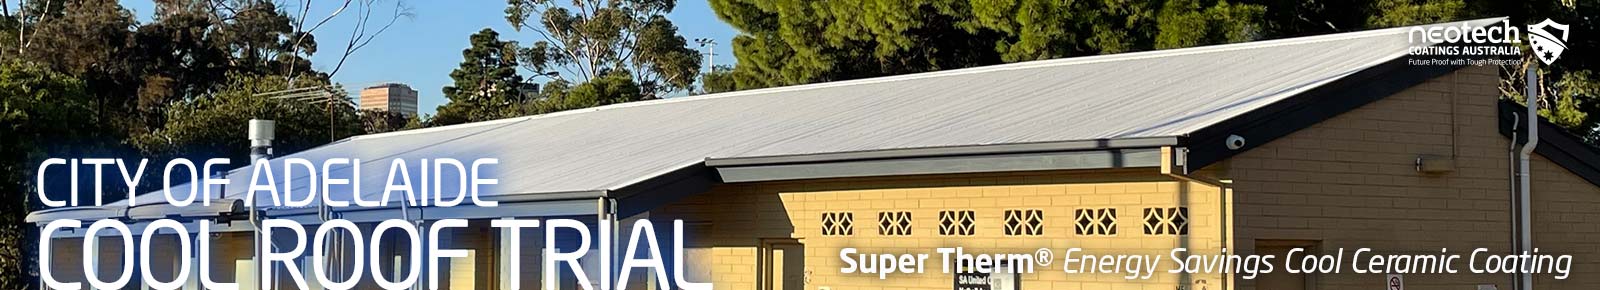 City of Adelaide Cool Roof Trial 2022-2023 Super Therm